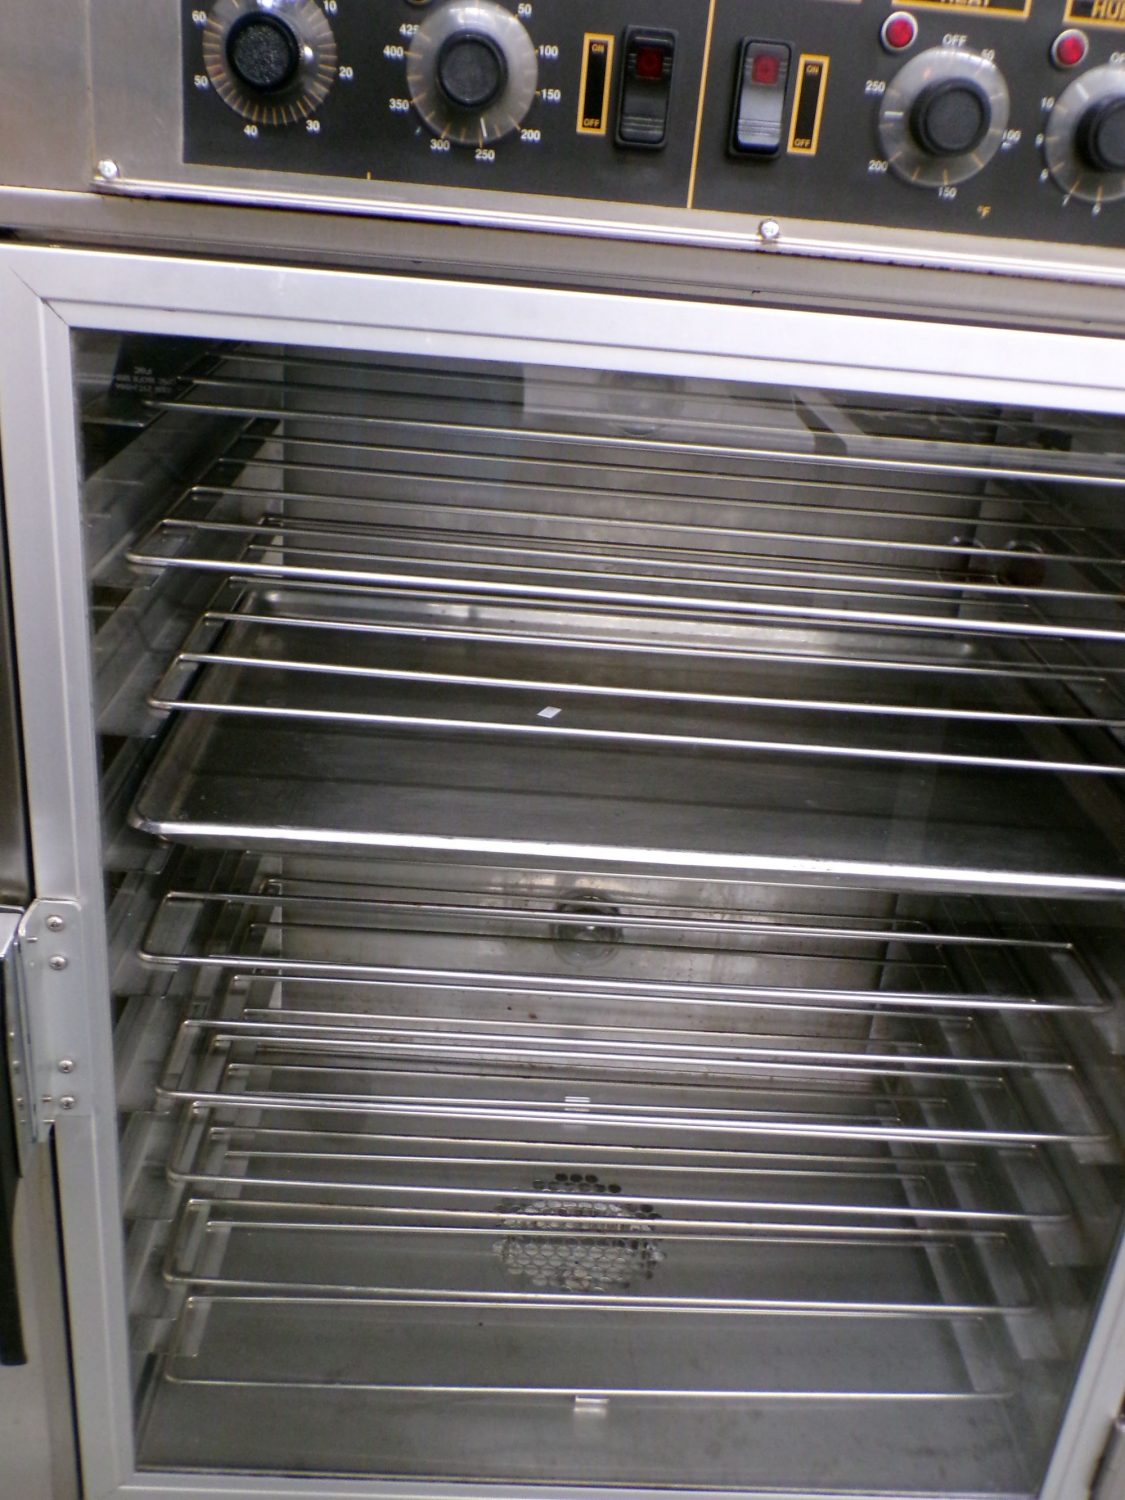 NUVU OVEN/PROOFER